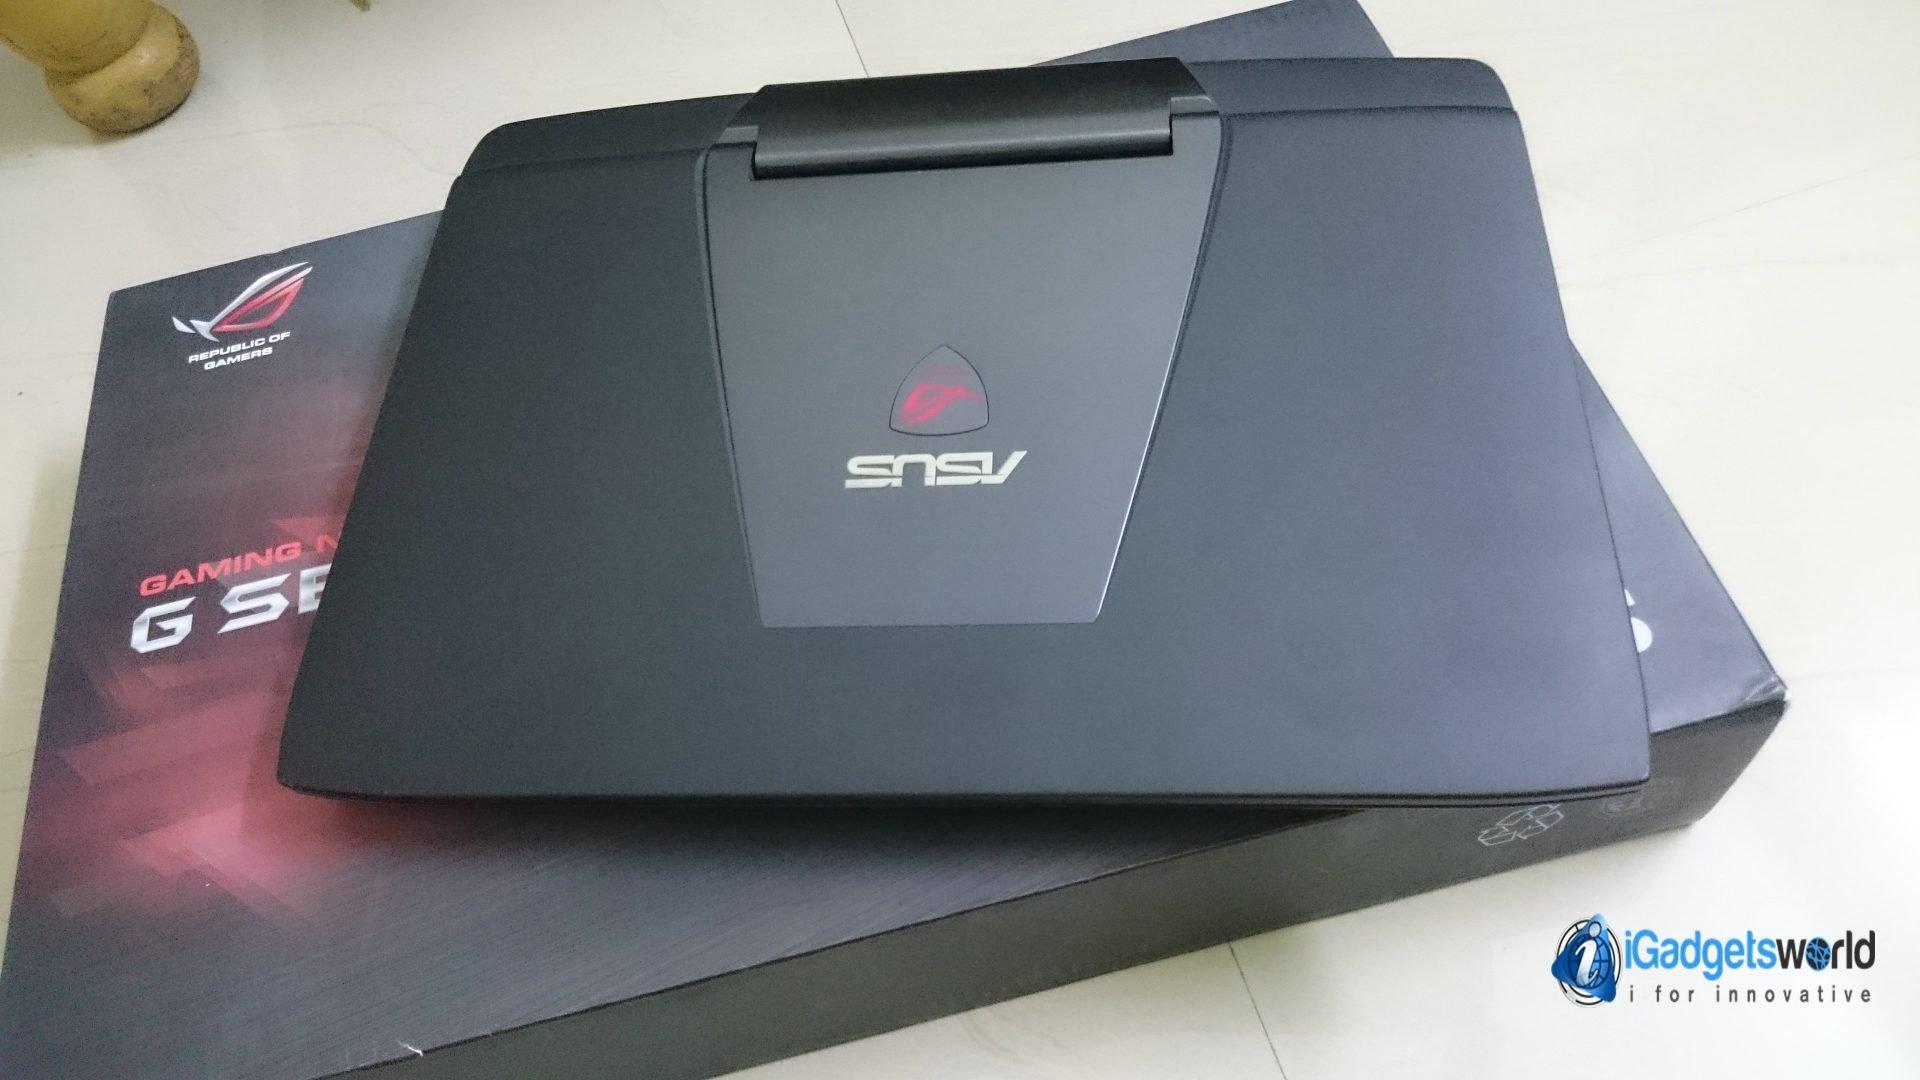 Asus ROG G751J Review: A Slightly Overpriced Ultra High-End Gaming Laptop - 16